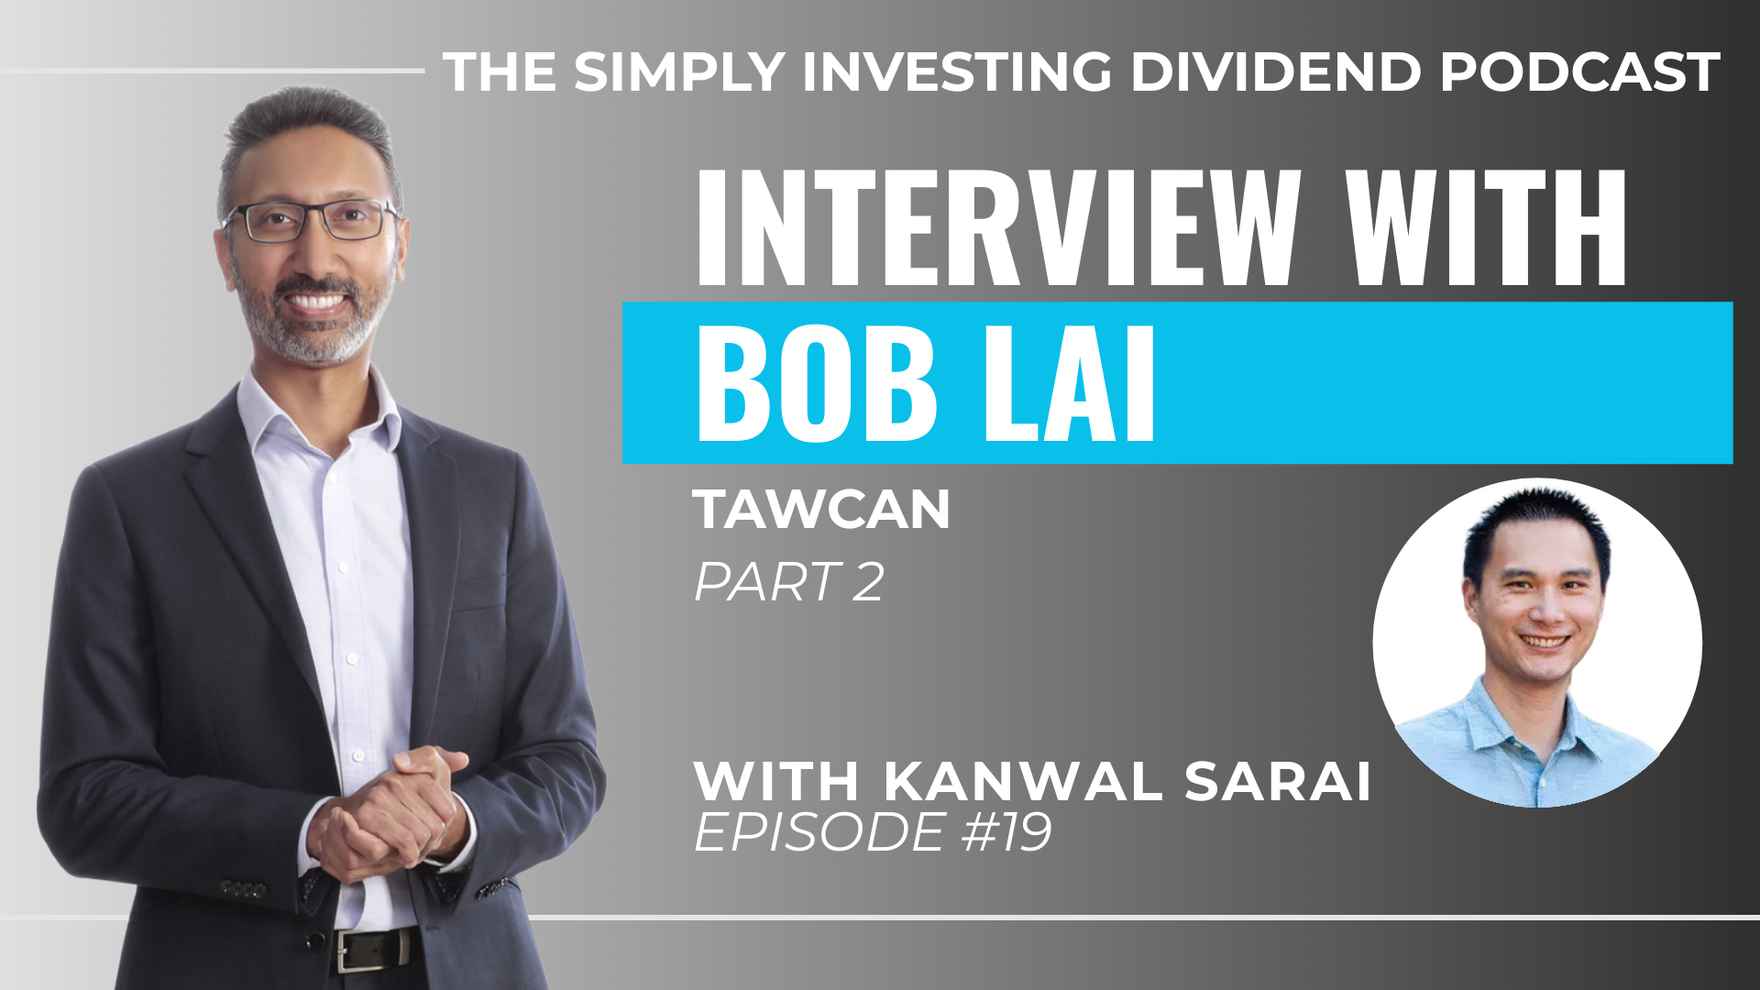 Simply Investing Dividend Podcast Episode 19 - Interview with Bob Lai of Tawcan (part 2)